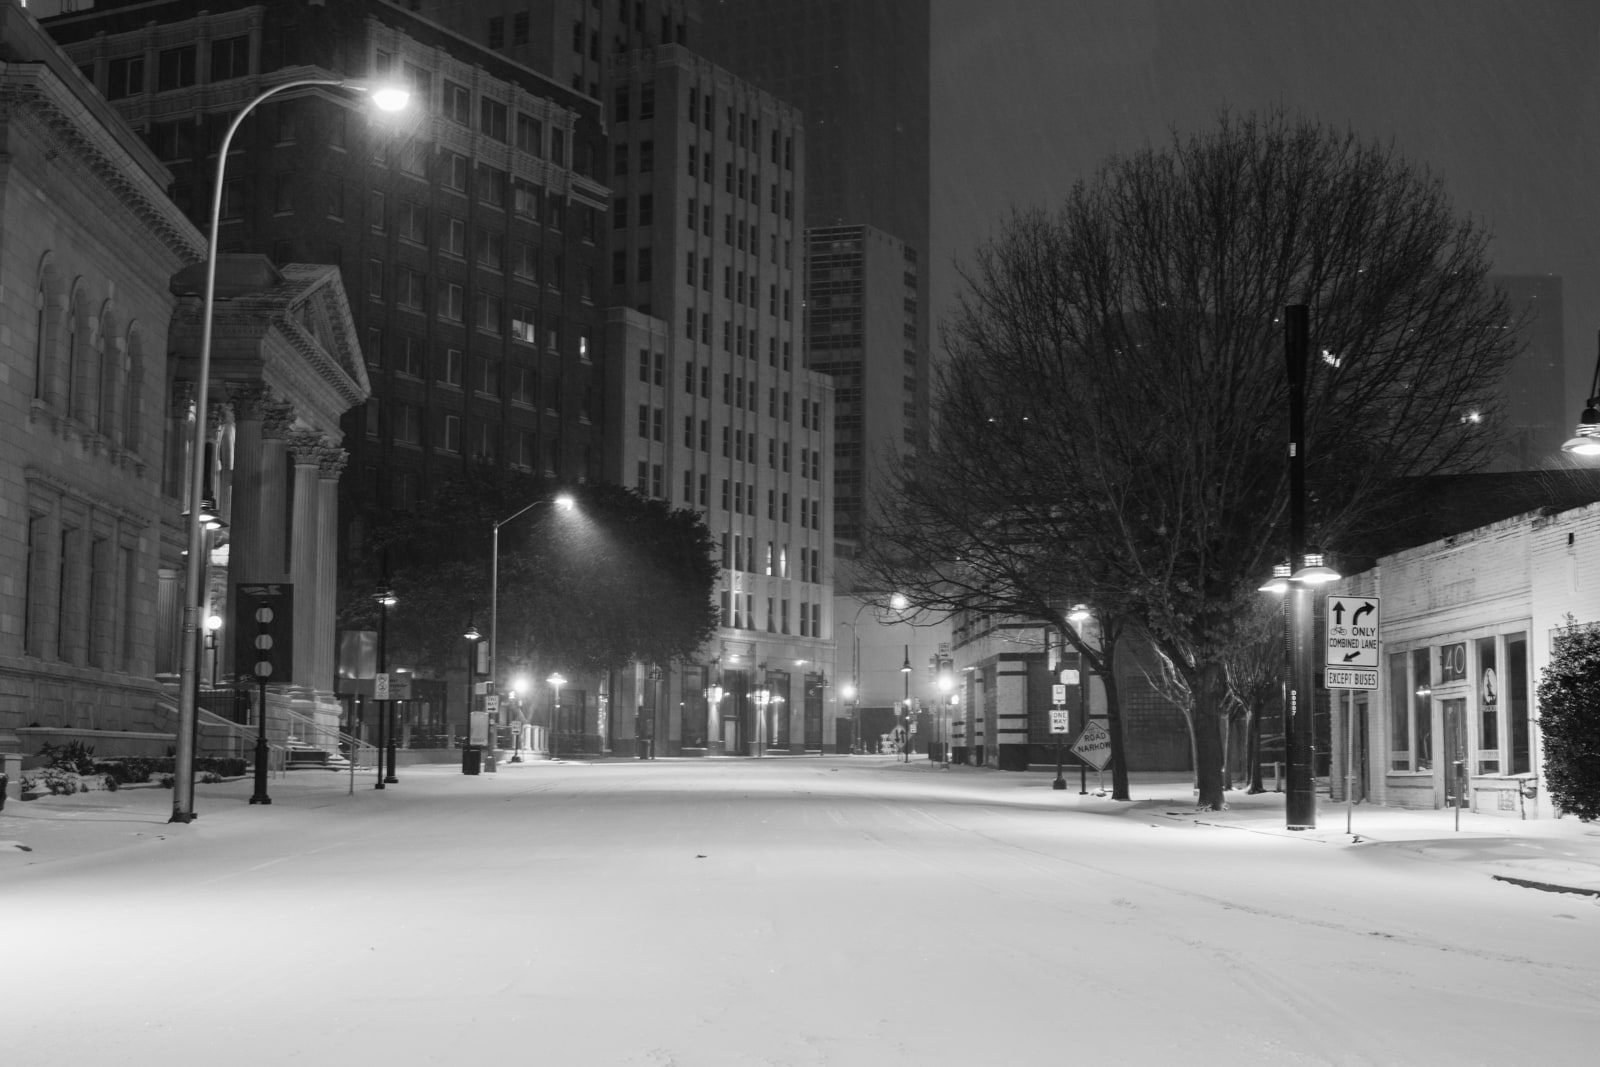 Downtown Dallas at night in a snowstorm